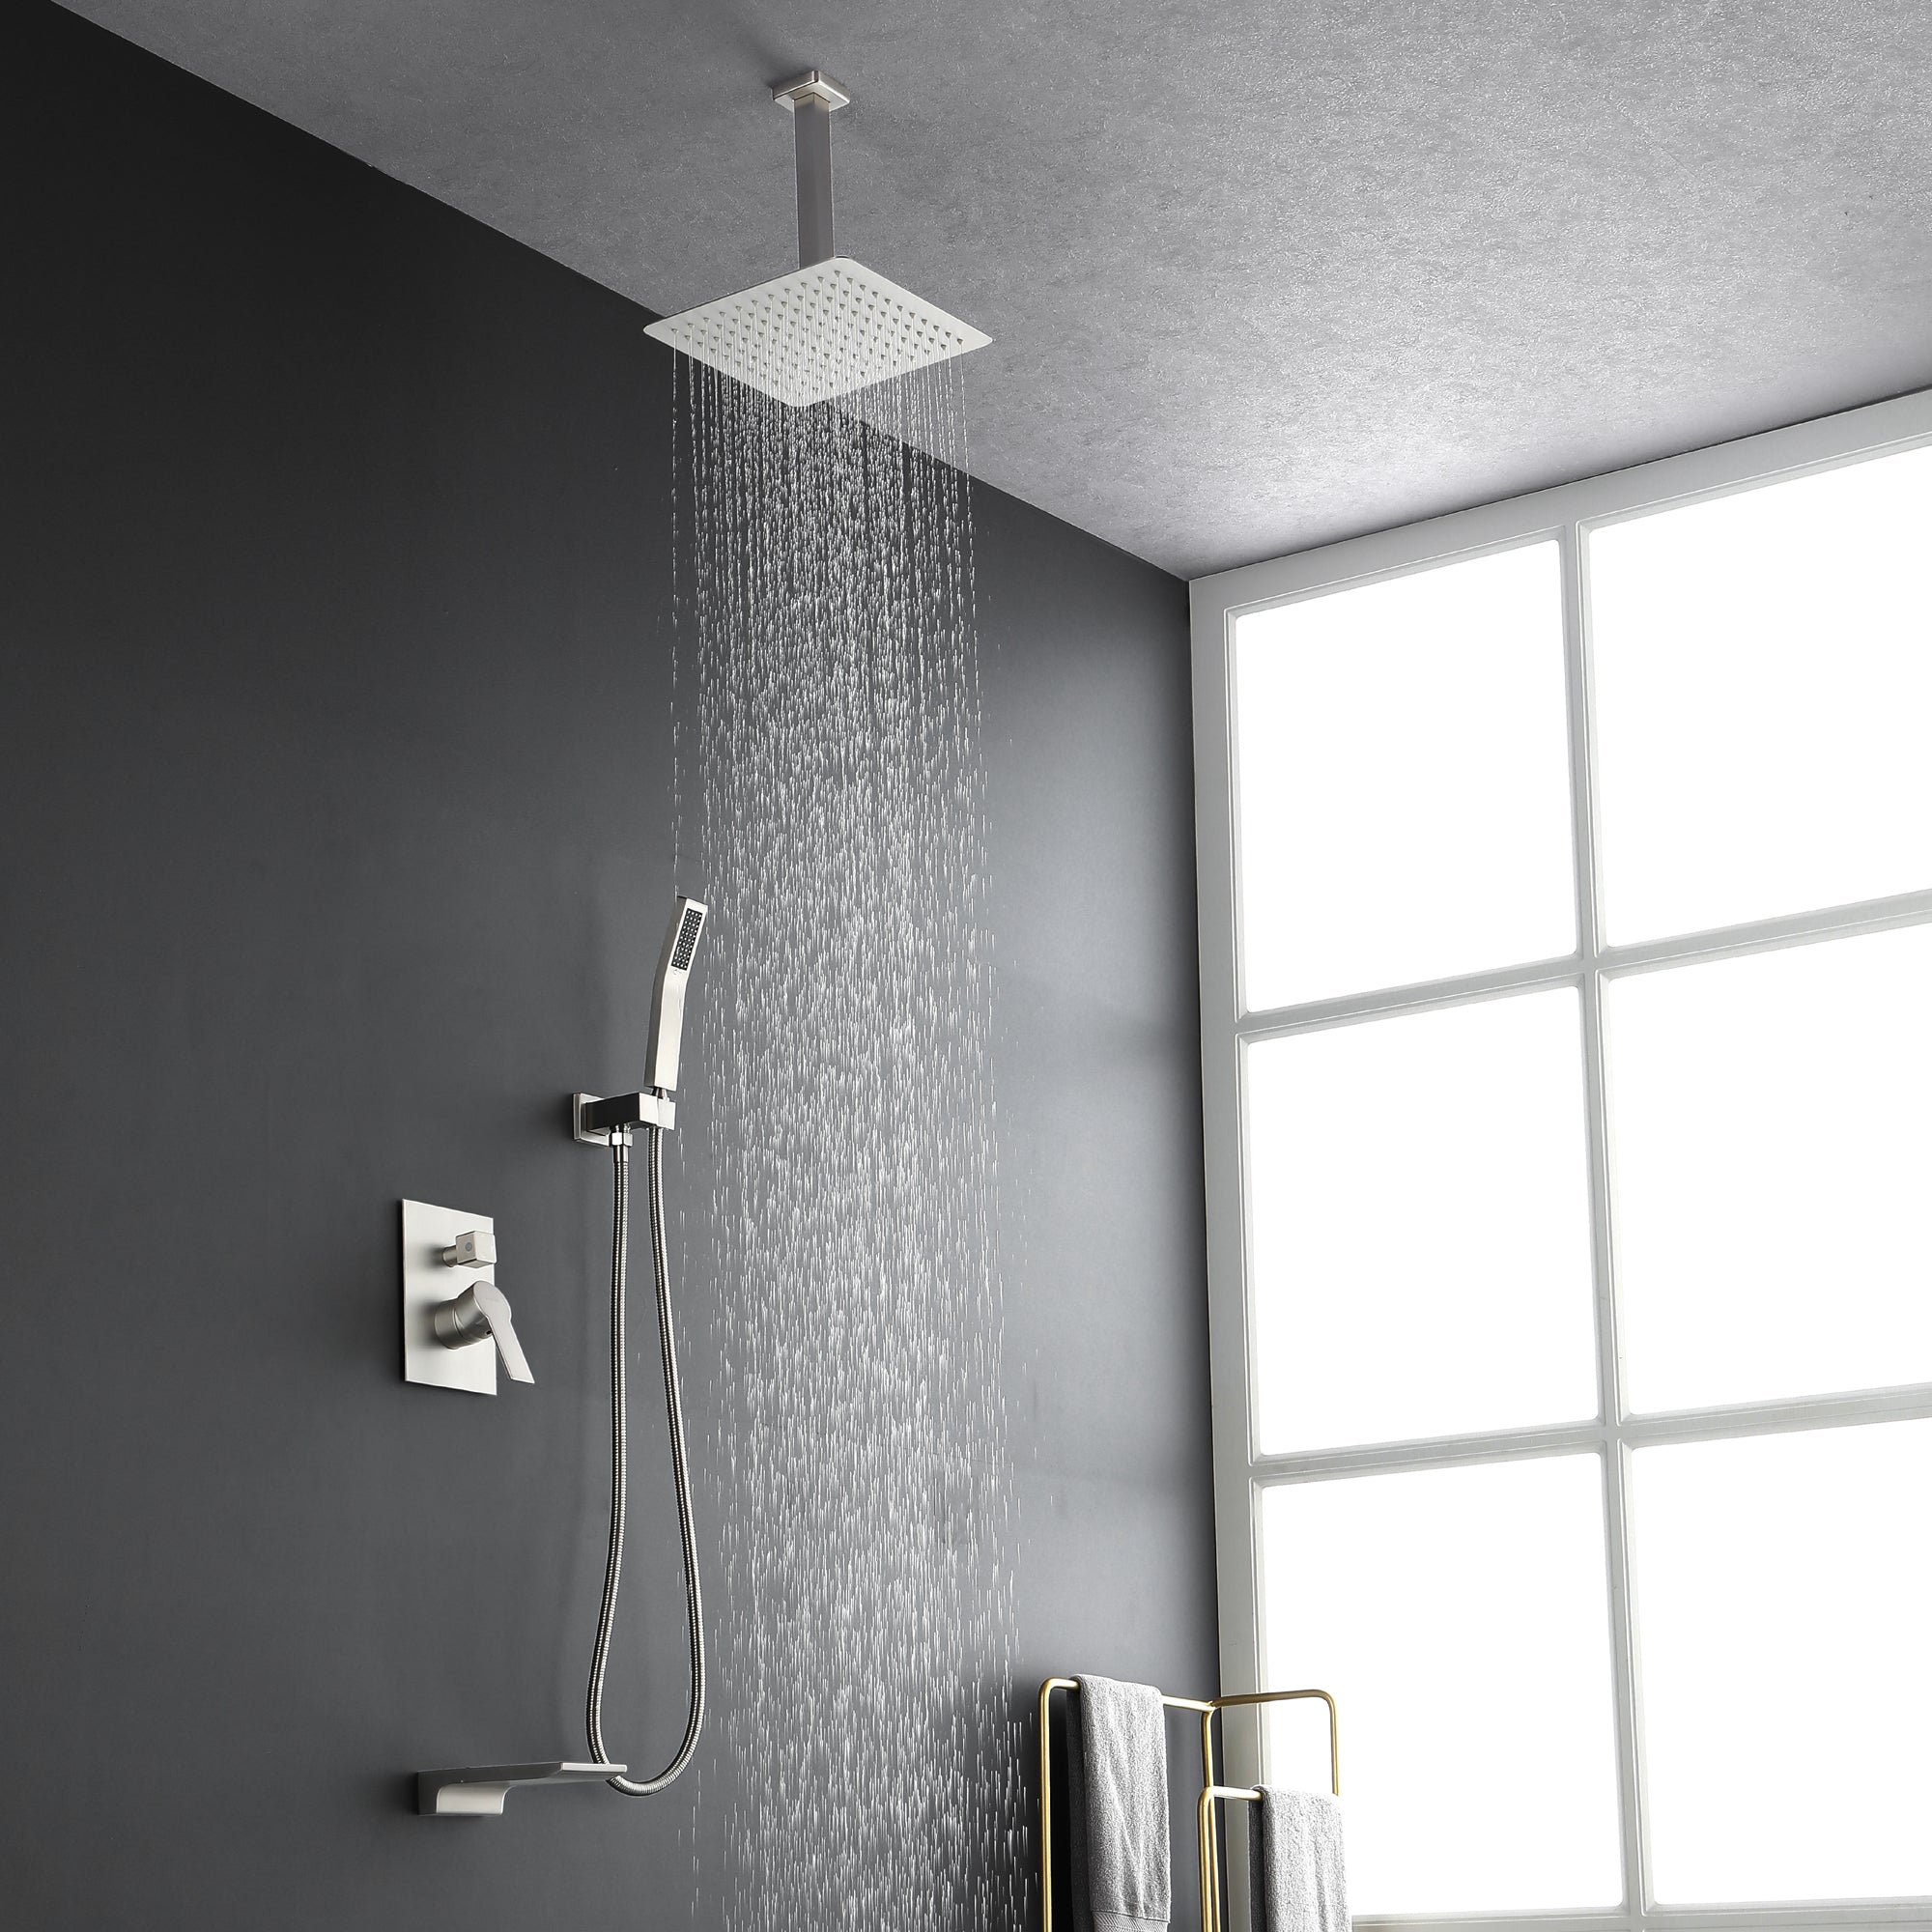 Ceiling Mounted Rain Shower System